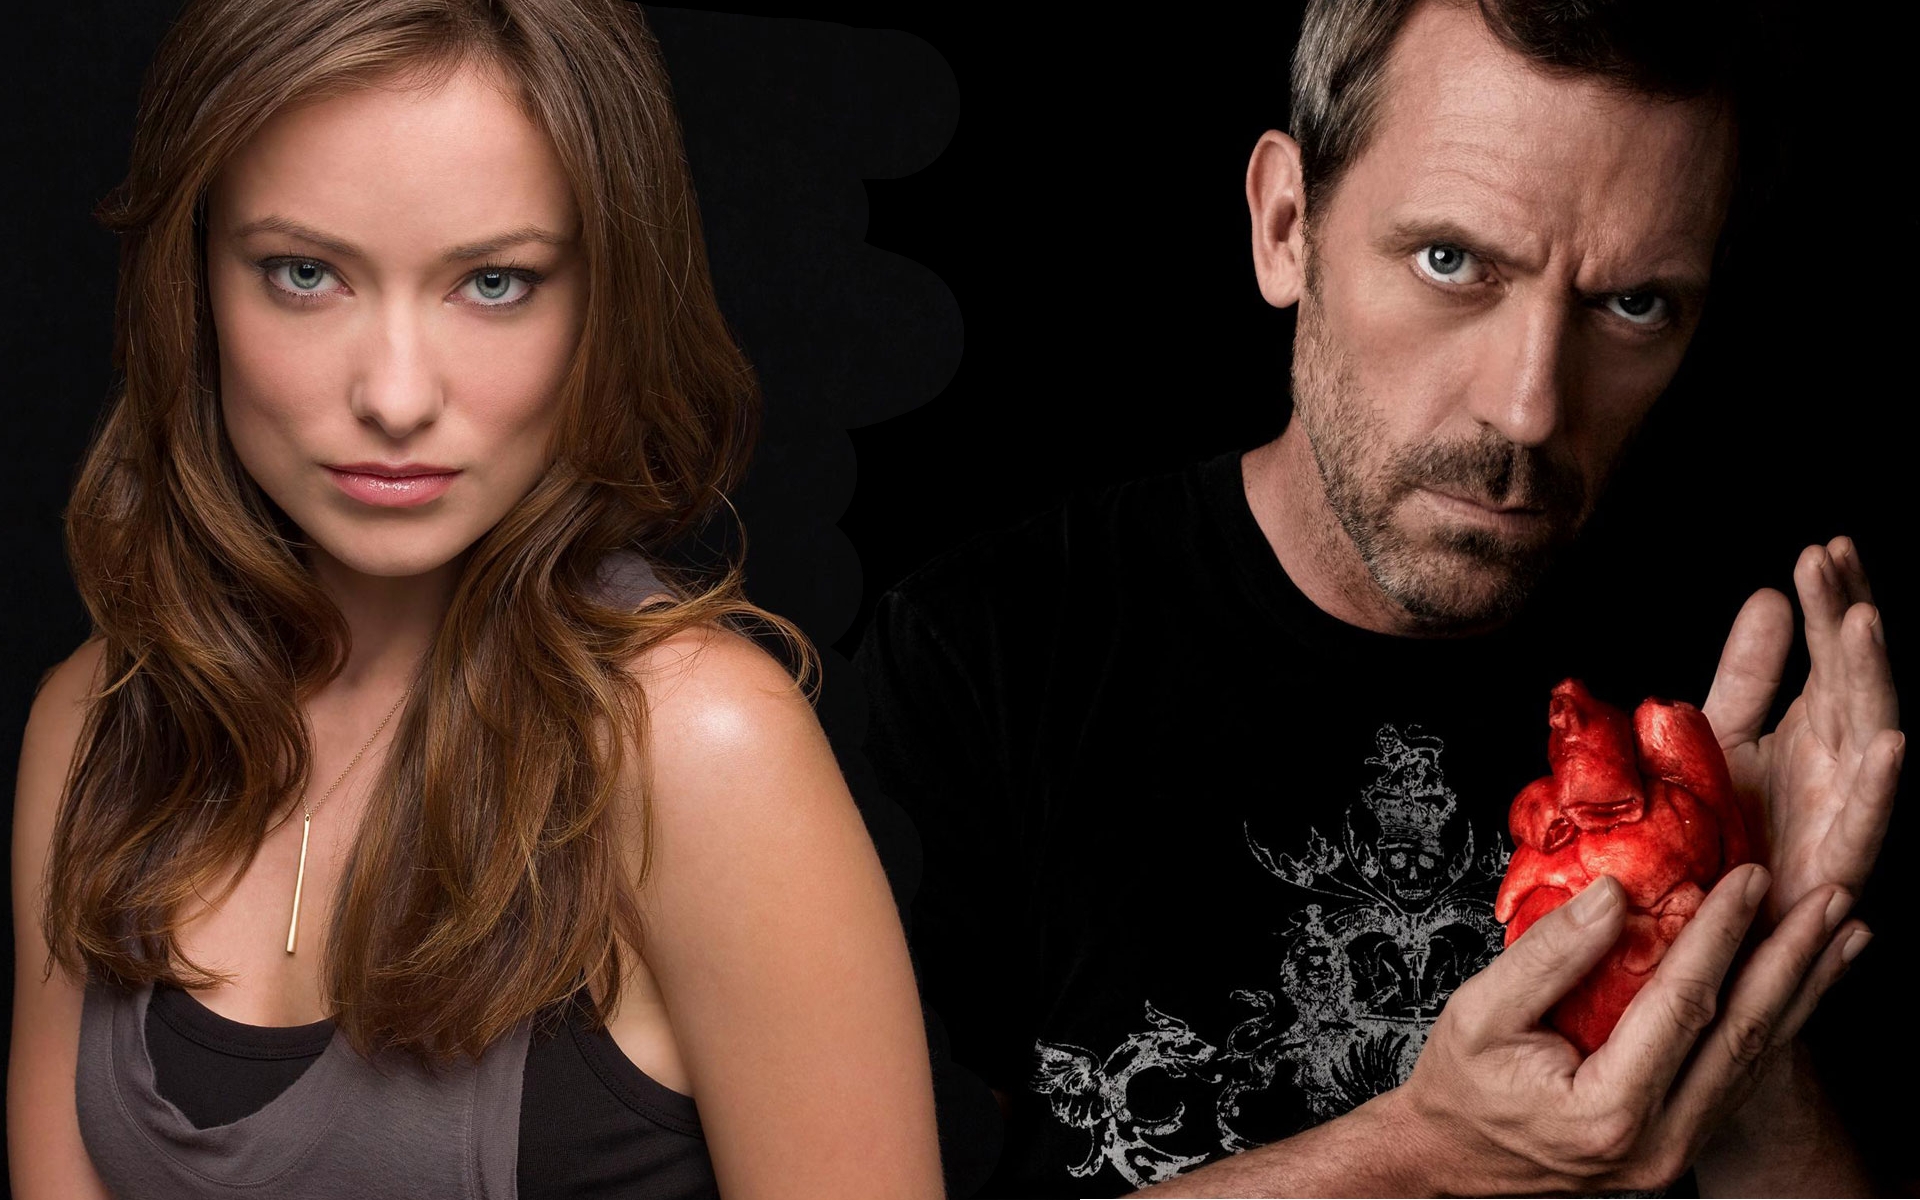 Hugh Laurie and Olivia Wilde in character as Gregory House and his colleague.